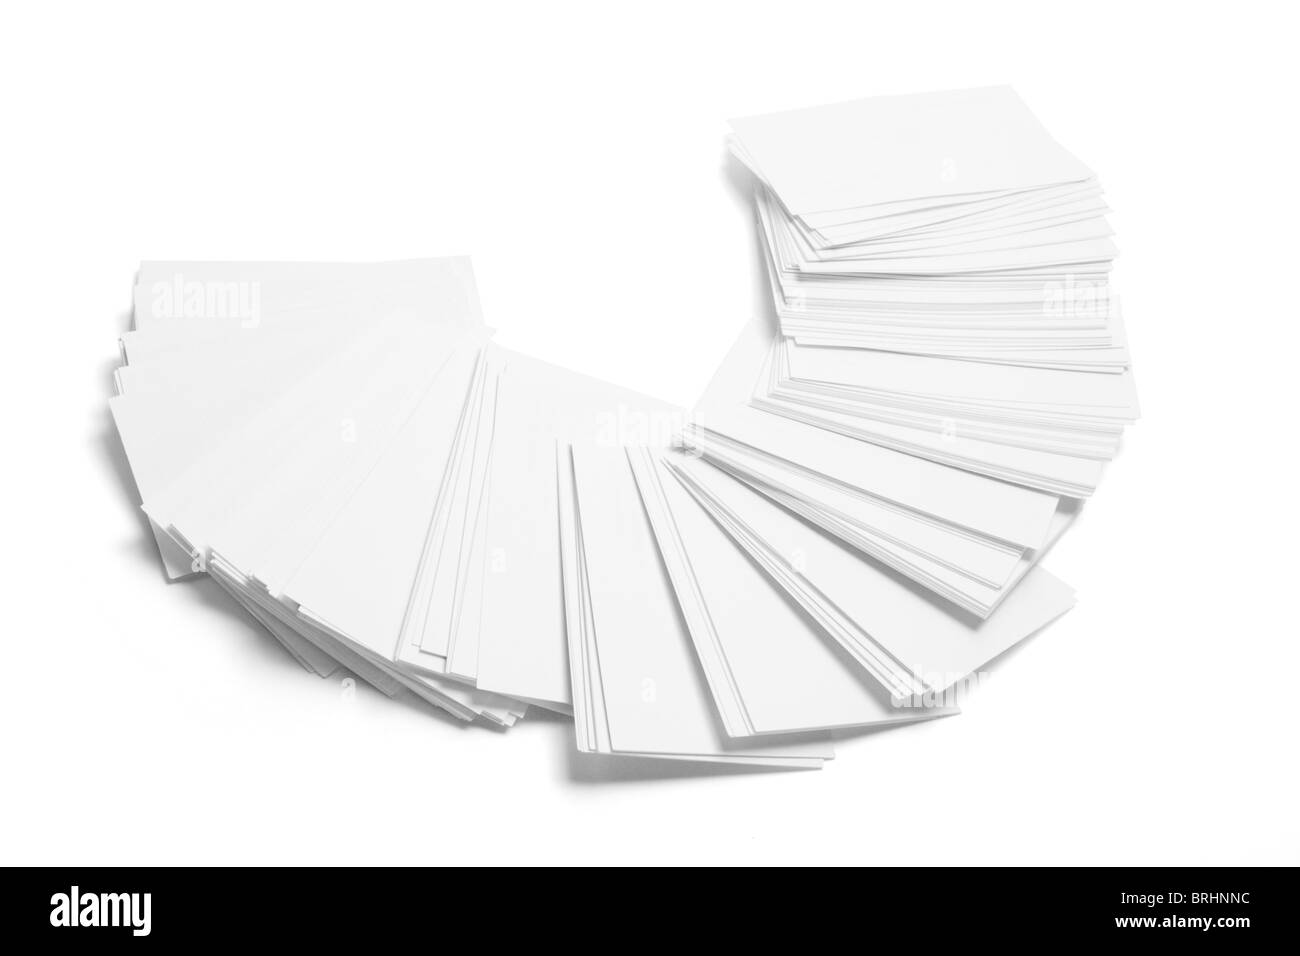 Blank Name Cards Stock Photo